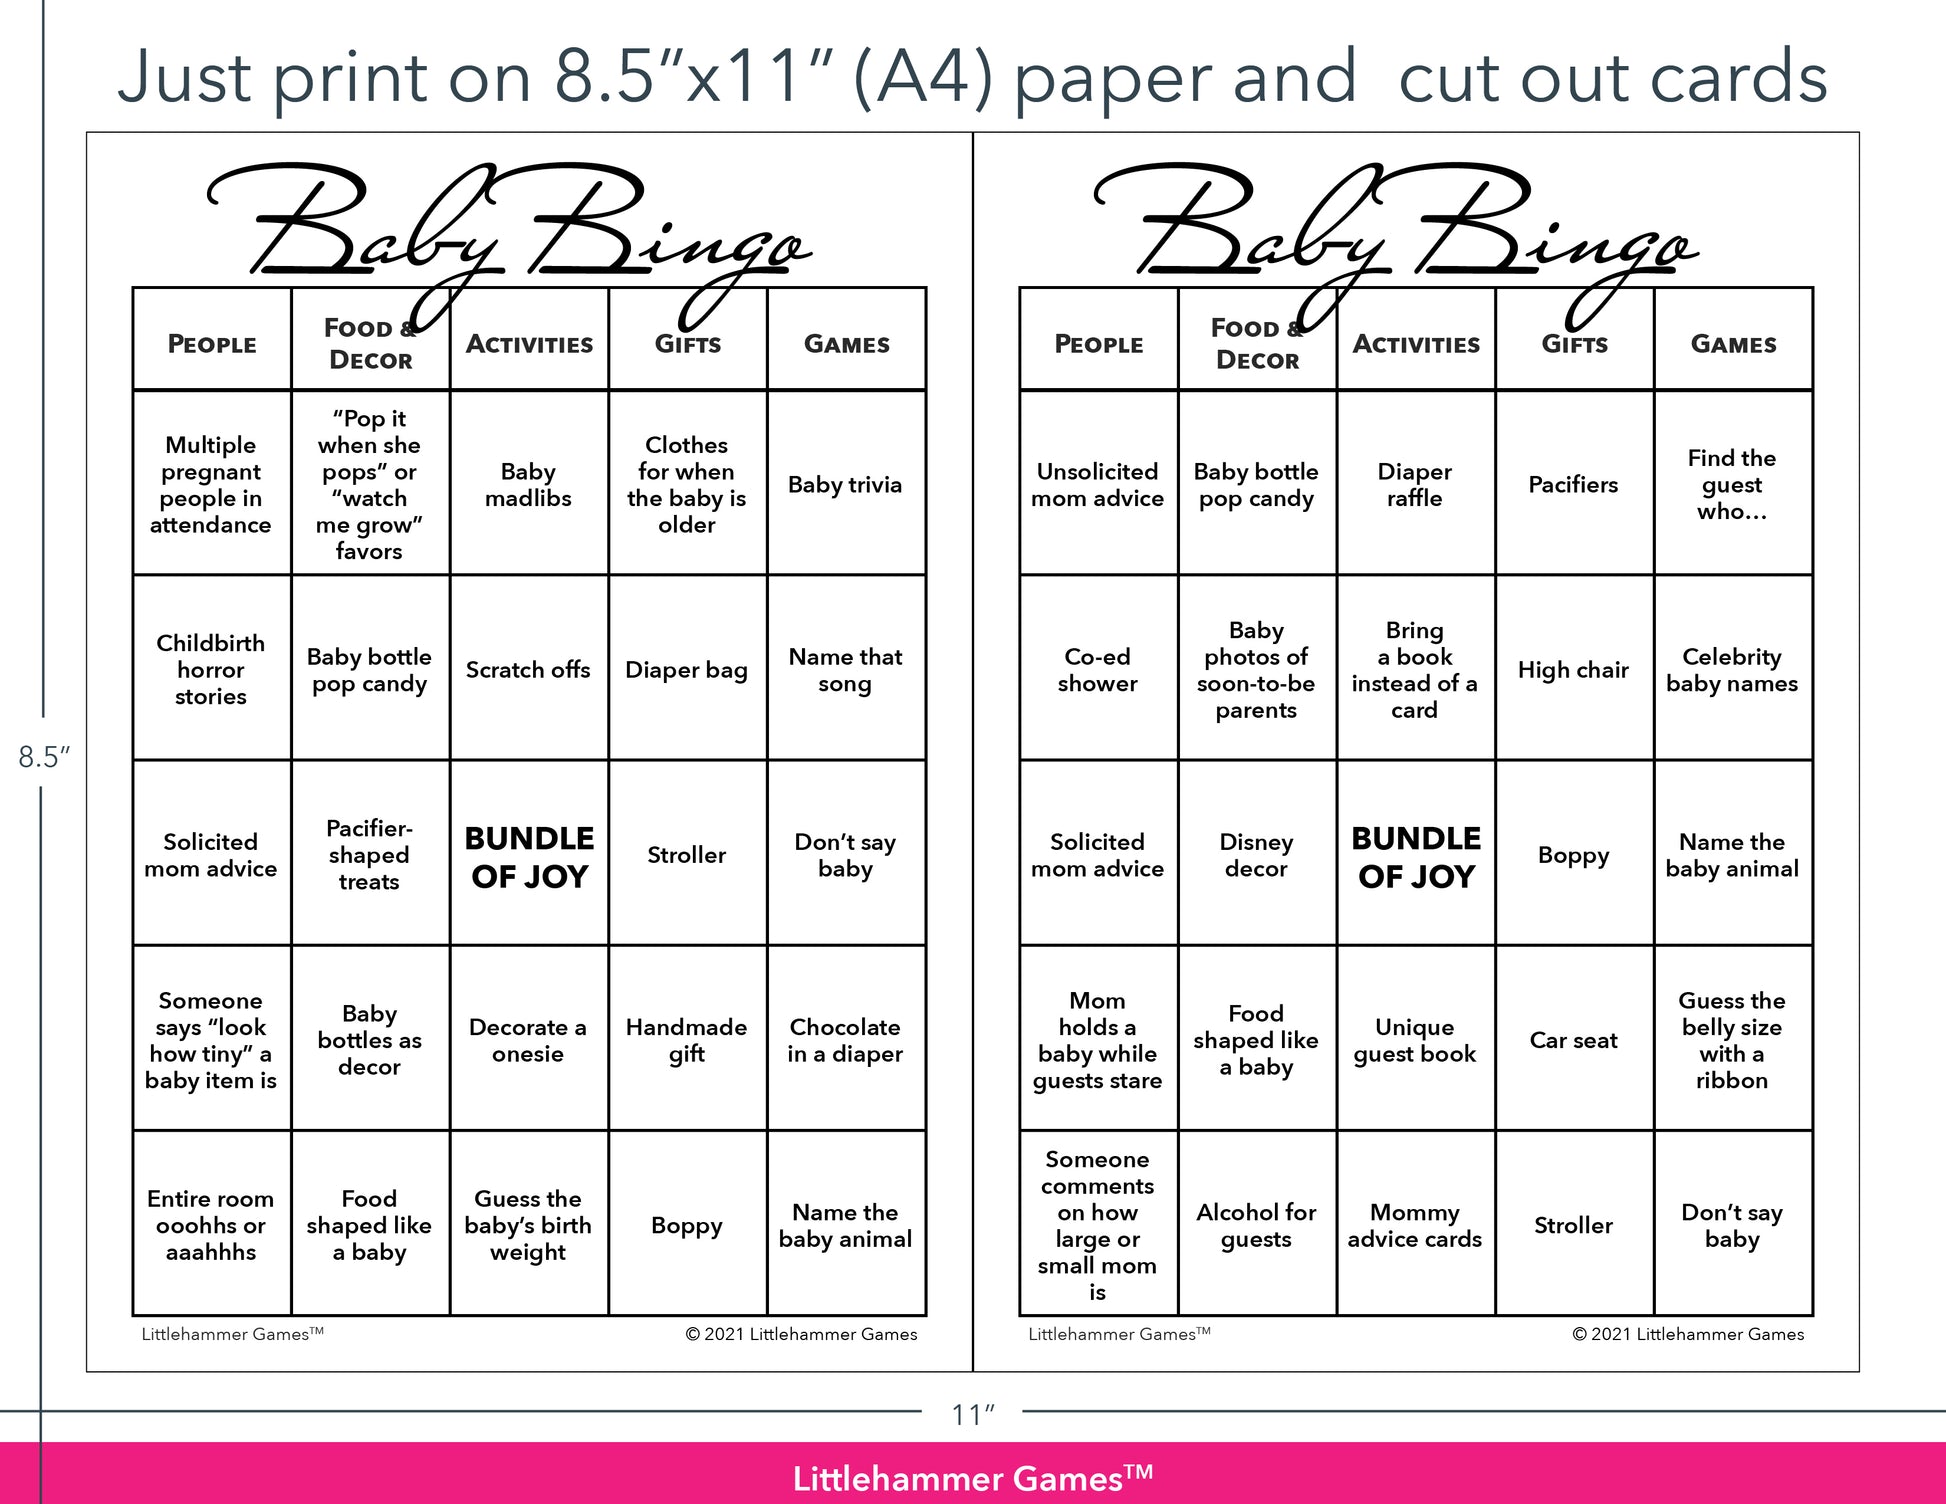 Minimalist black and white Baby Bingo game cards with printing instructions